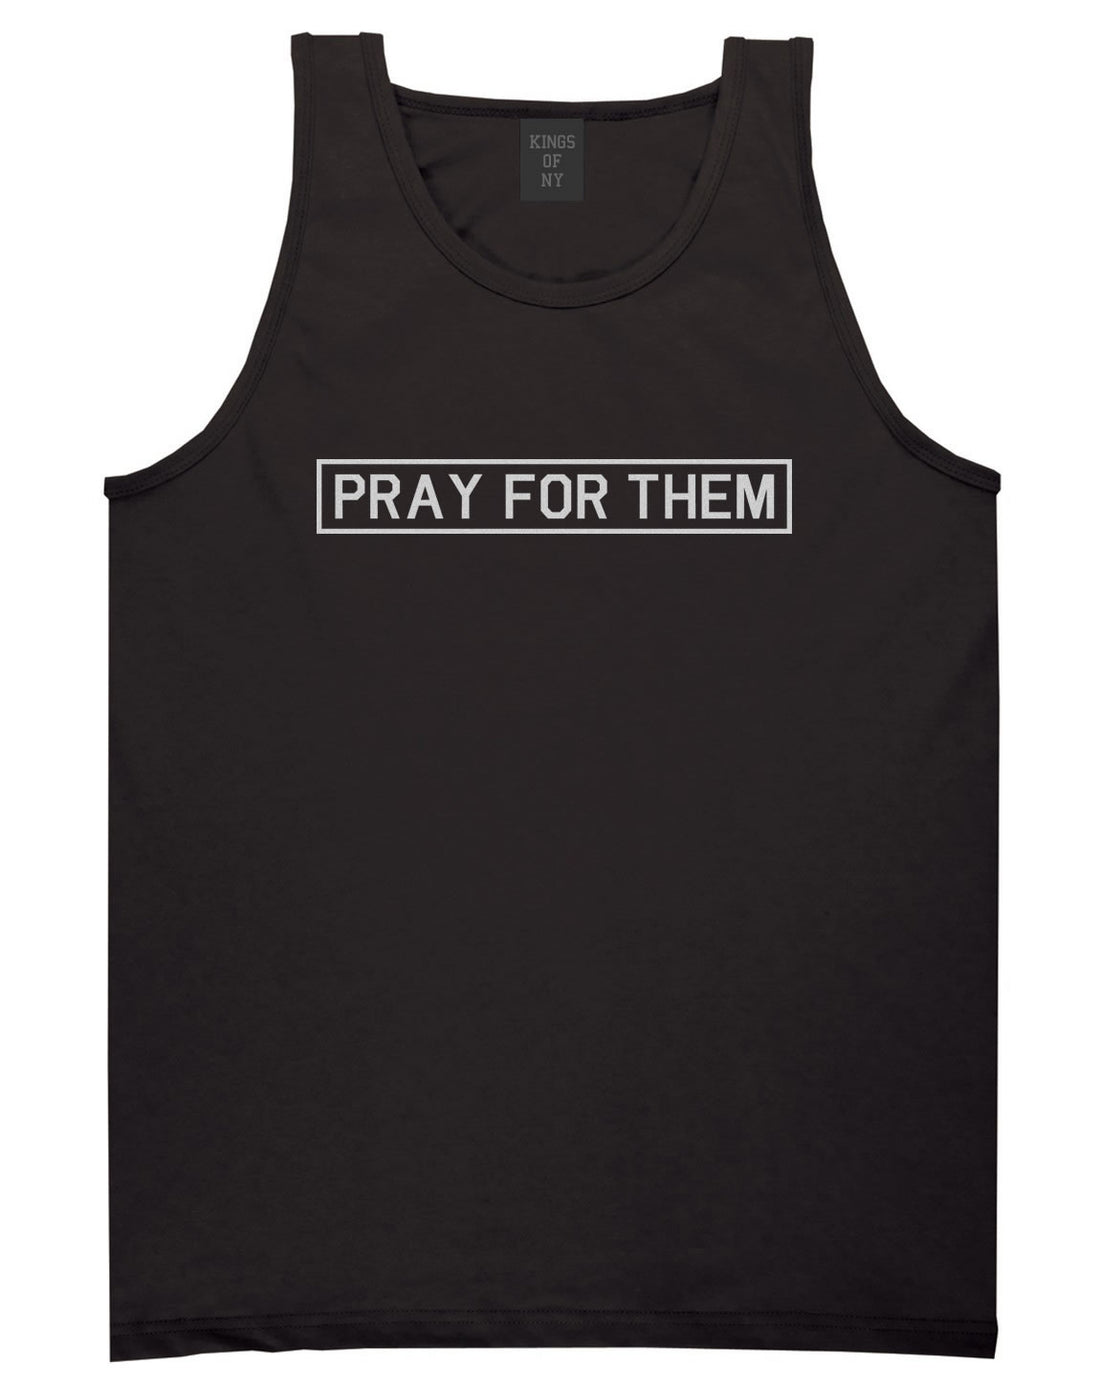 Pray For Them Fall15 Tank Top in Black by Kings Of NY